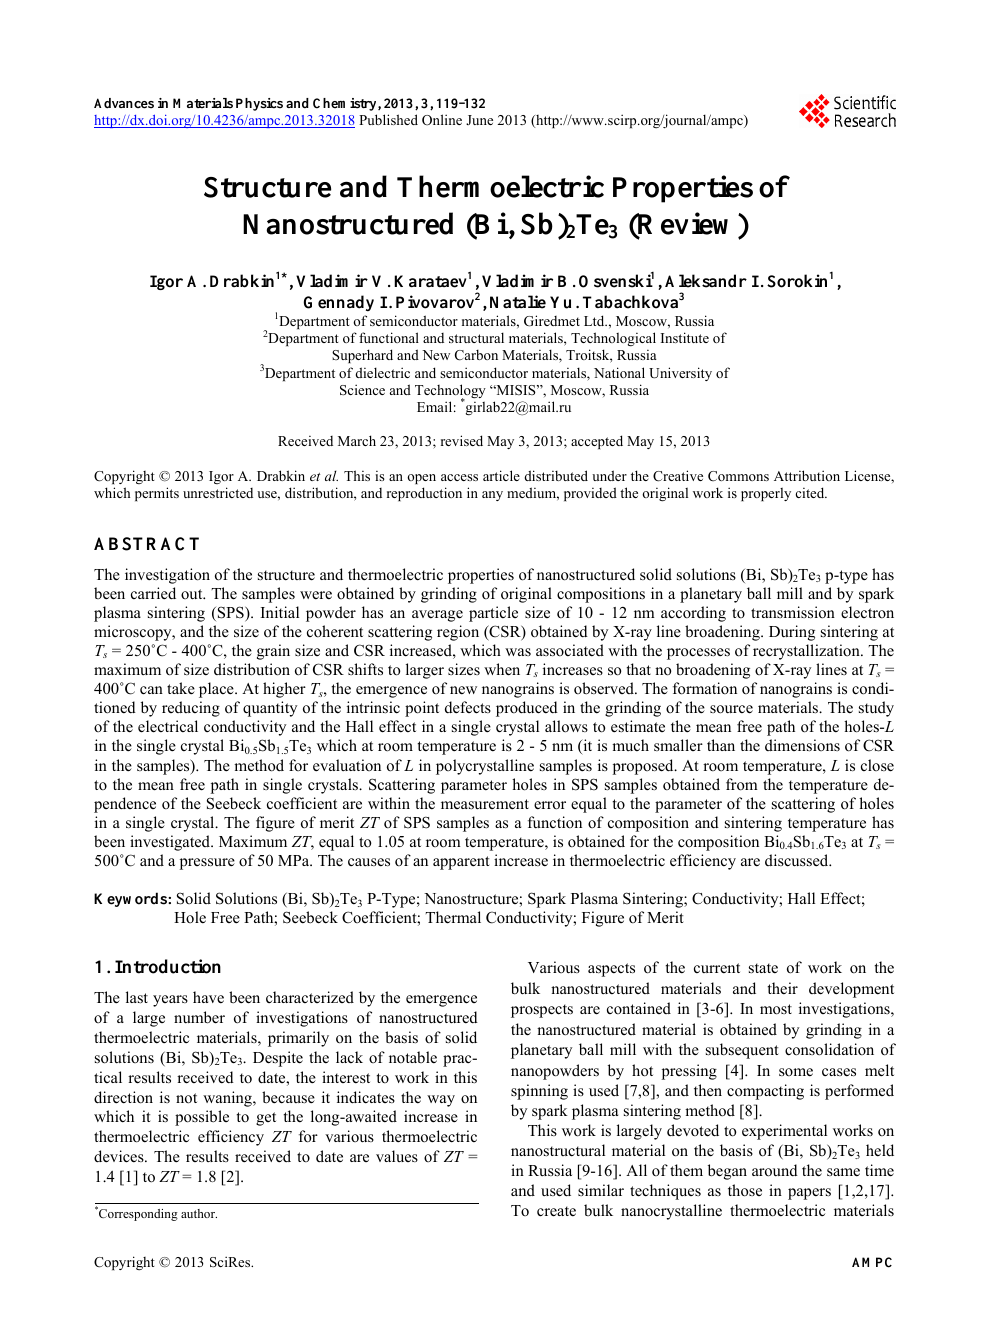 Structure And Thermoelectric Properties Of Nanostructured Bi Sb Lt Sub Gt 2 Lt Sub Gt Te Lt Sub Gt 3 Lt Sub Gt Review Topic Of Research Paper In Nano Technology Download Scholarly Article Pdf And Read For Free On Cyberleninka Open Science Hub